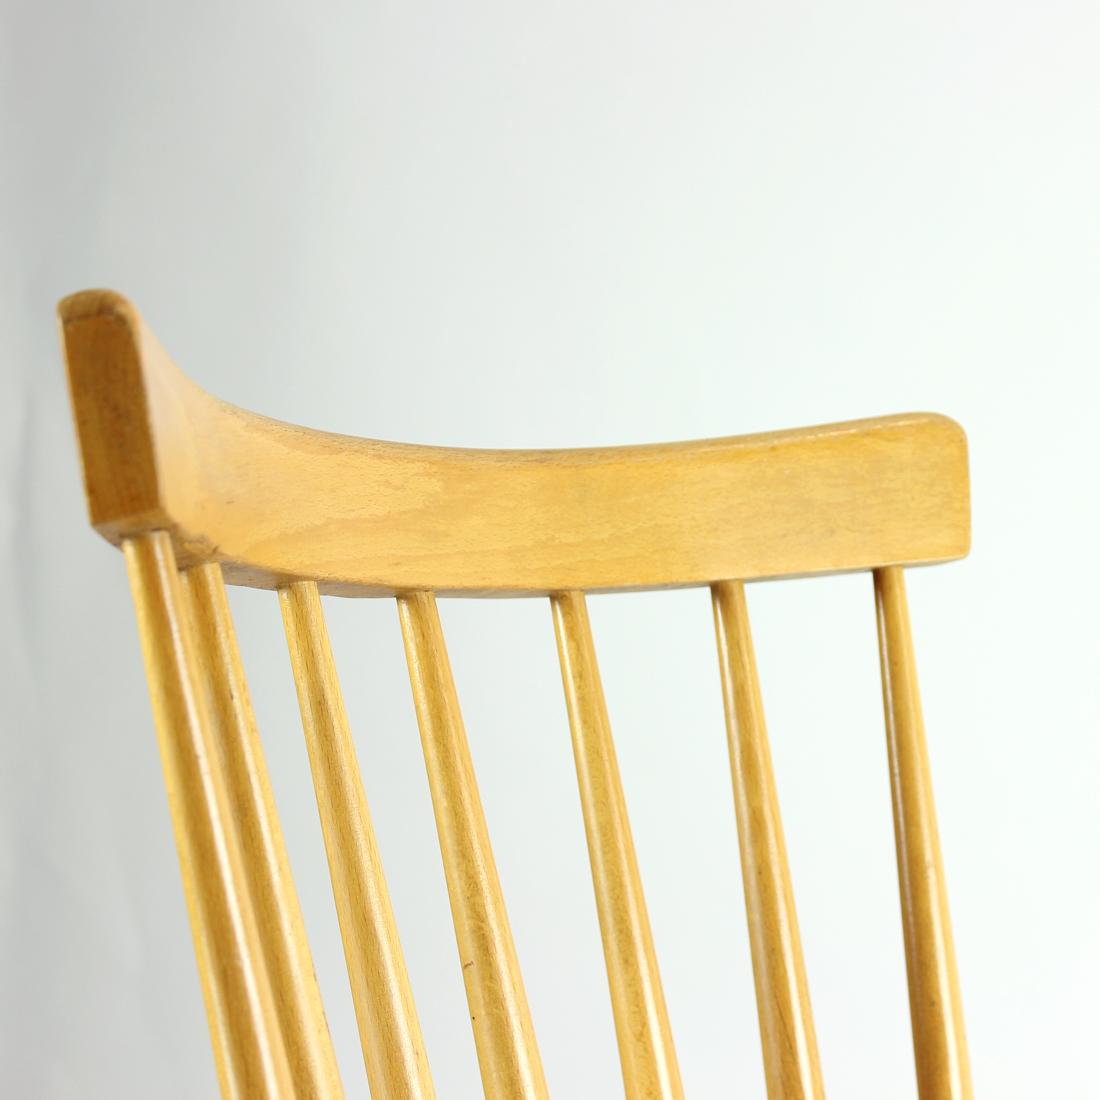 Midcentury Ironica Chair by Ton in Oak Wood, Czechoslovakia 1960s For Sale 3